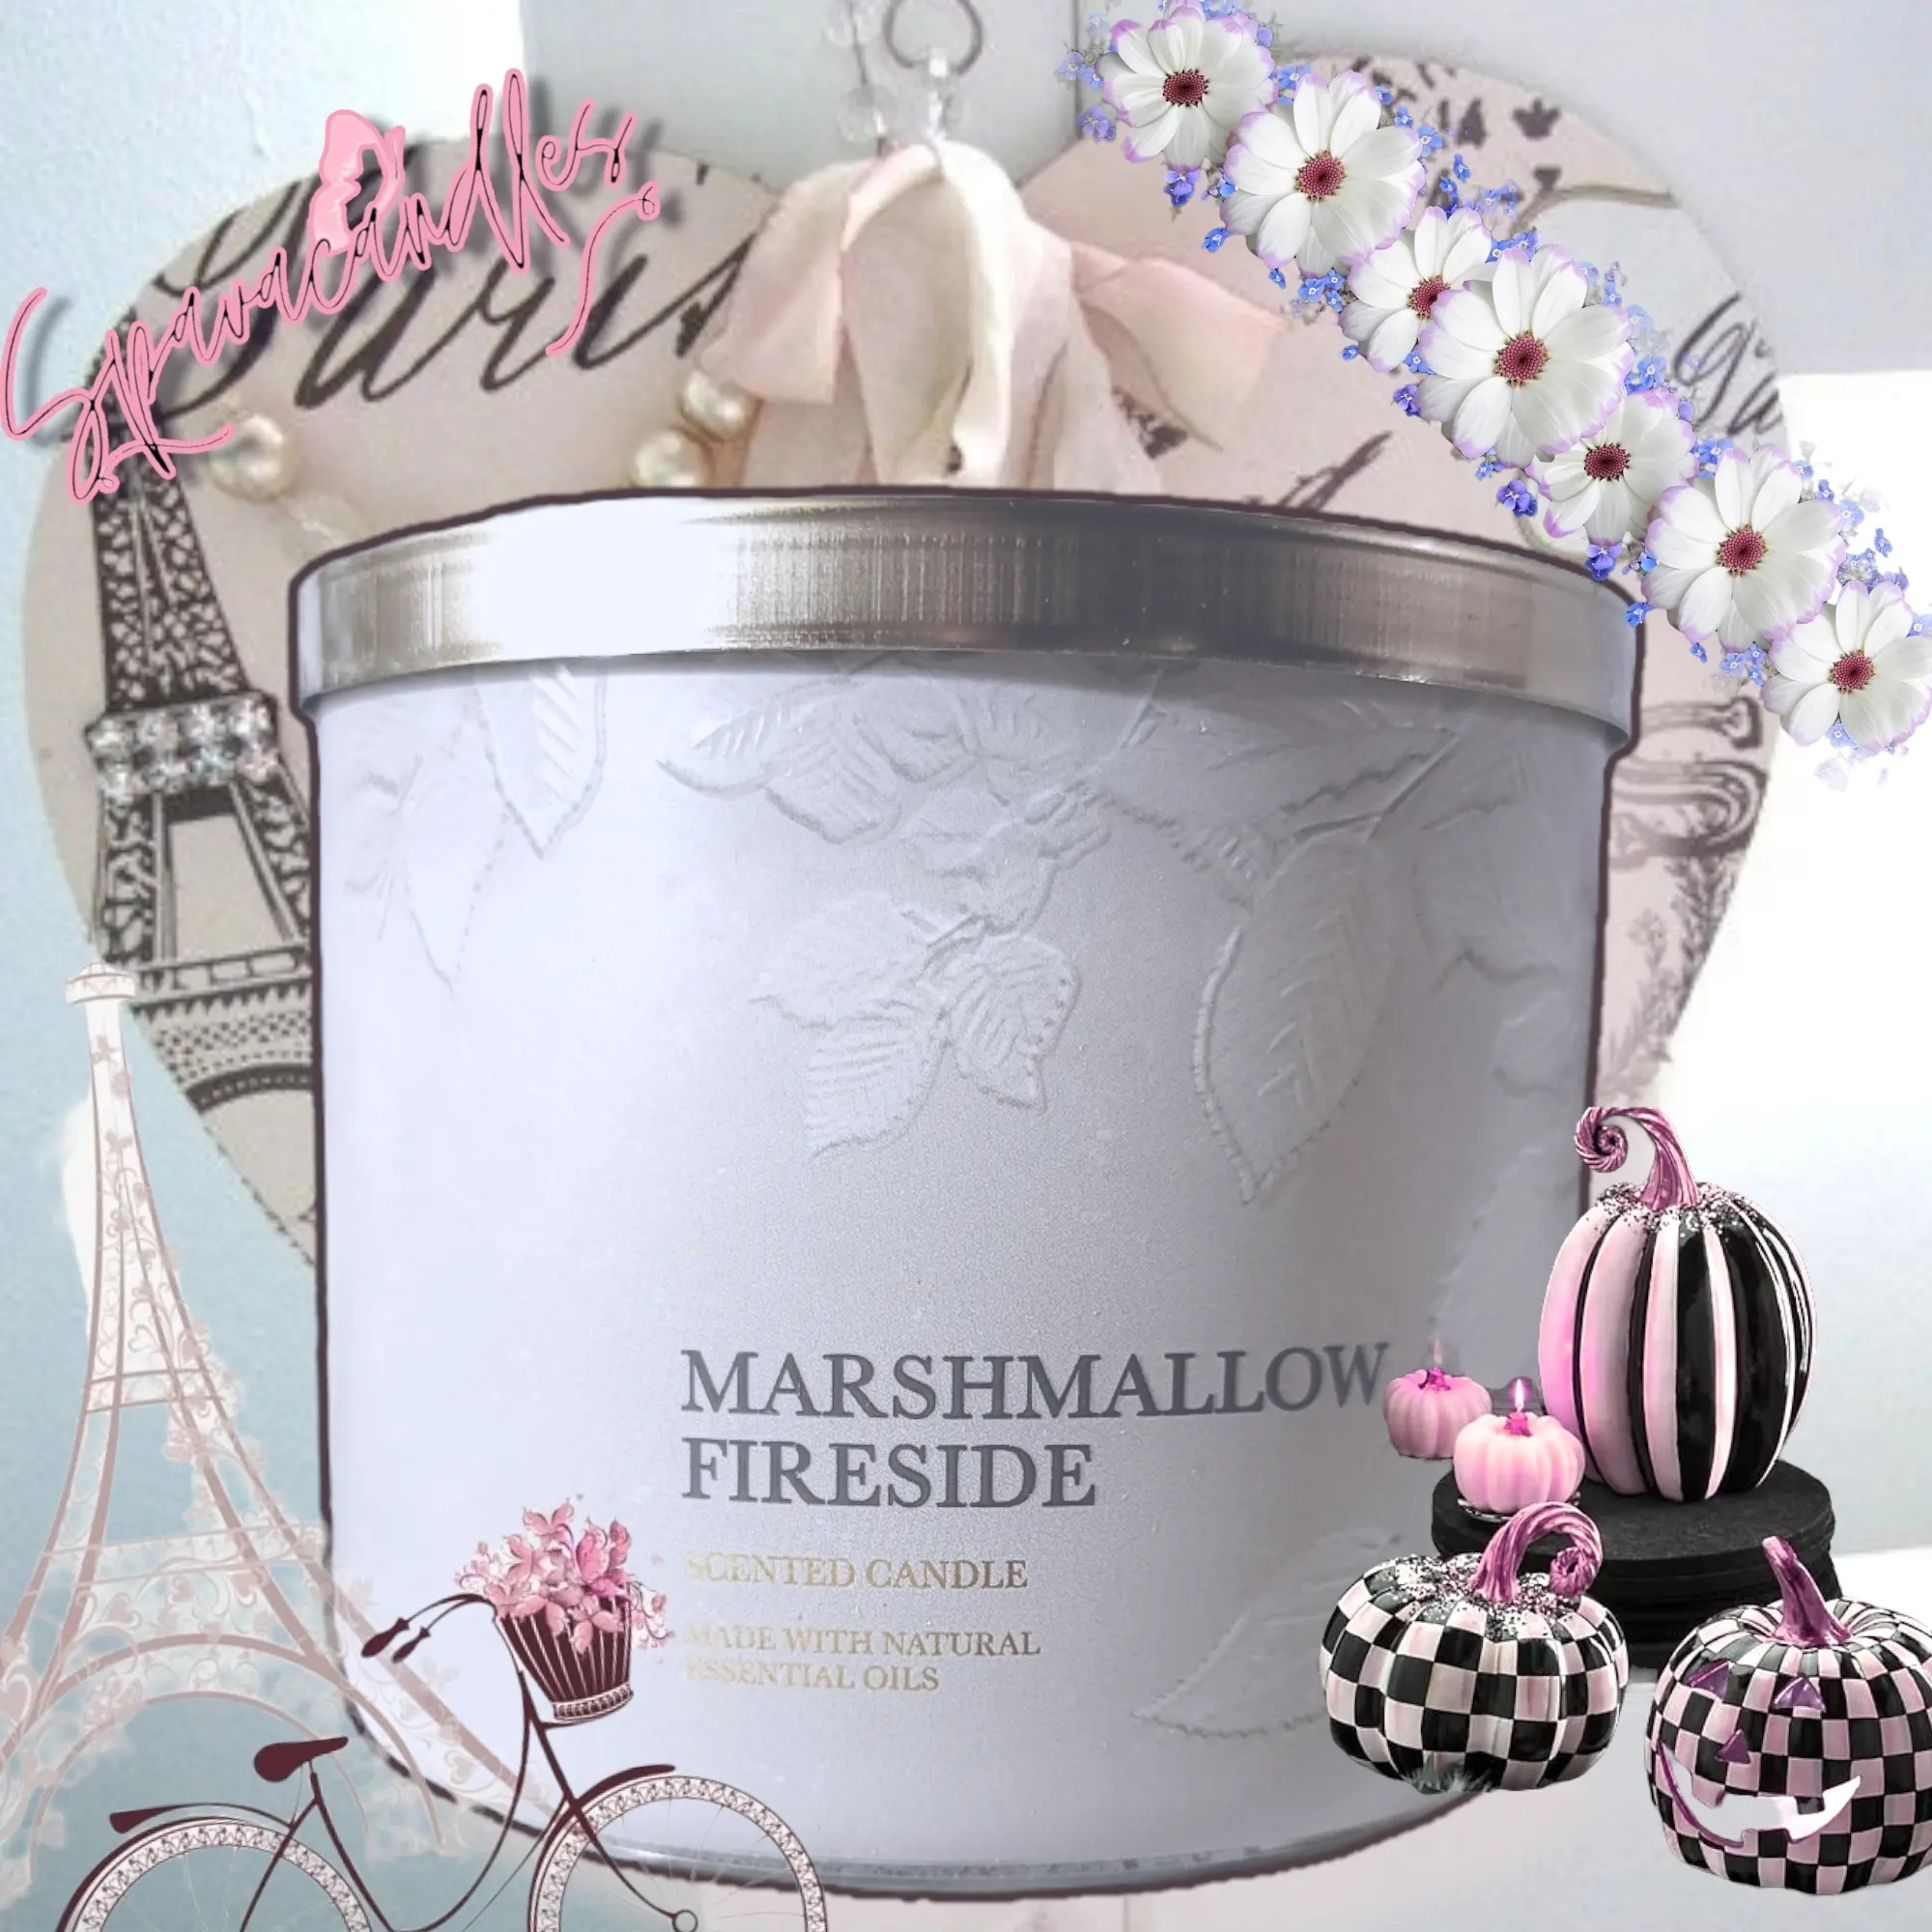 Marshmallow Fireside 3 Wick Candle 2022